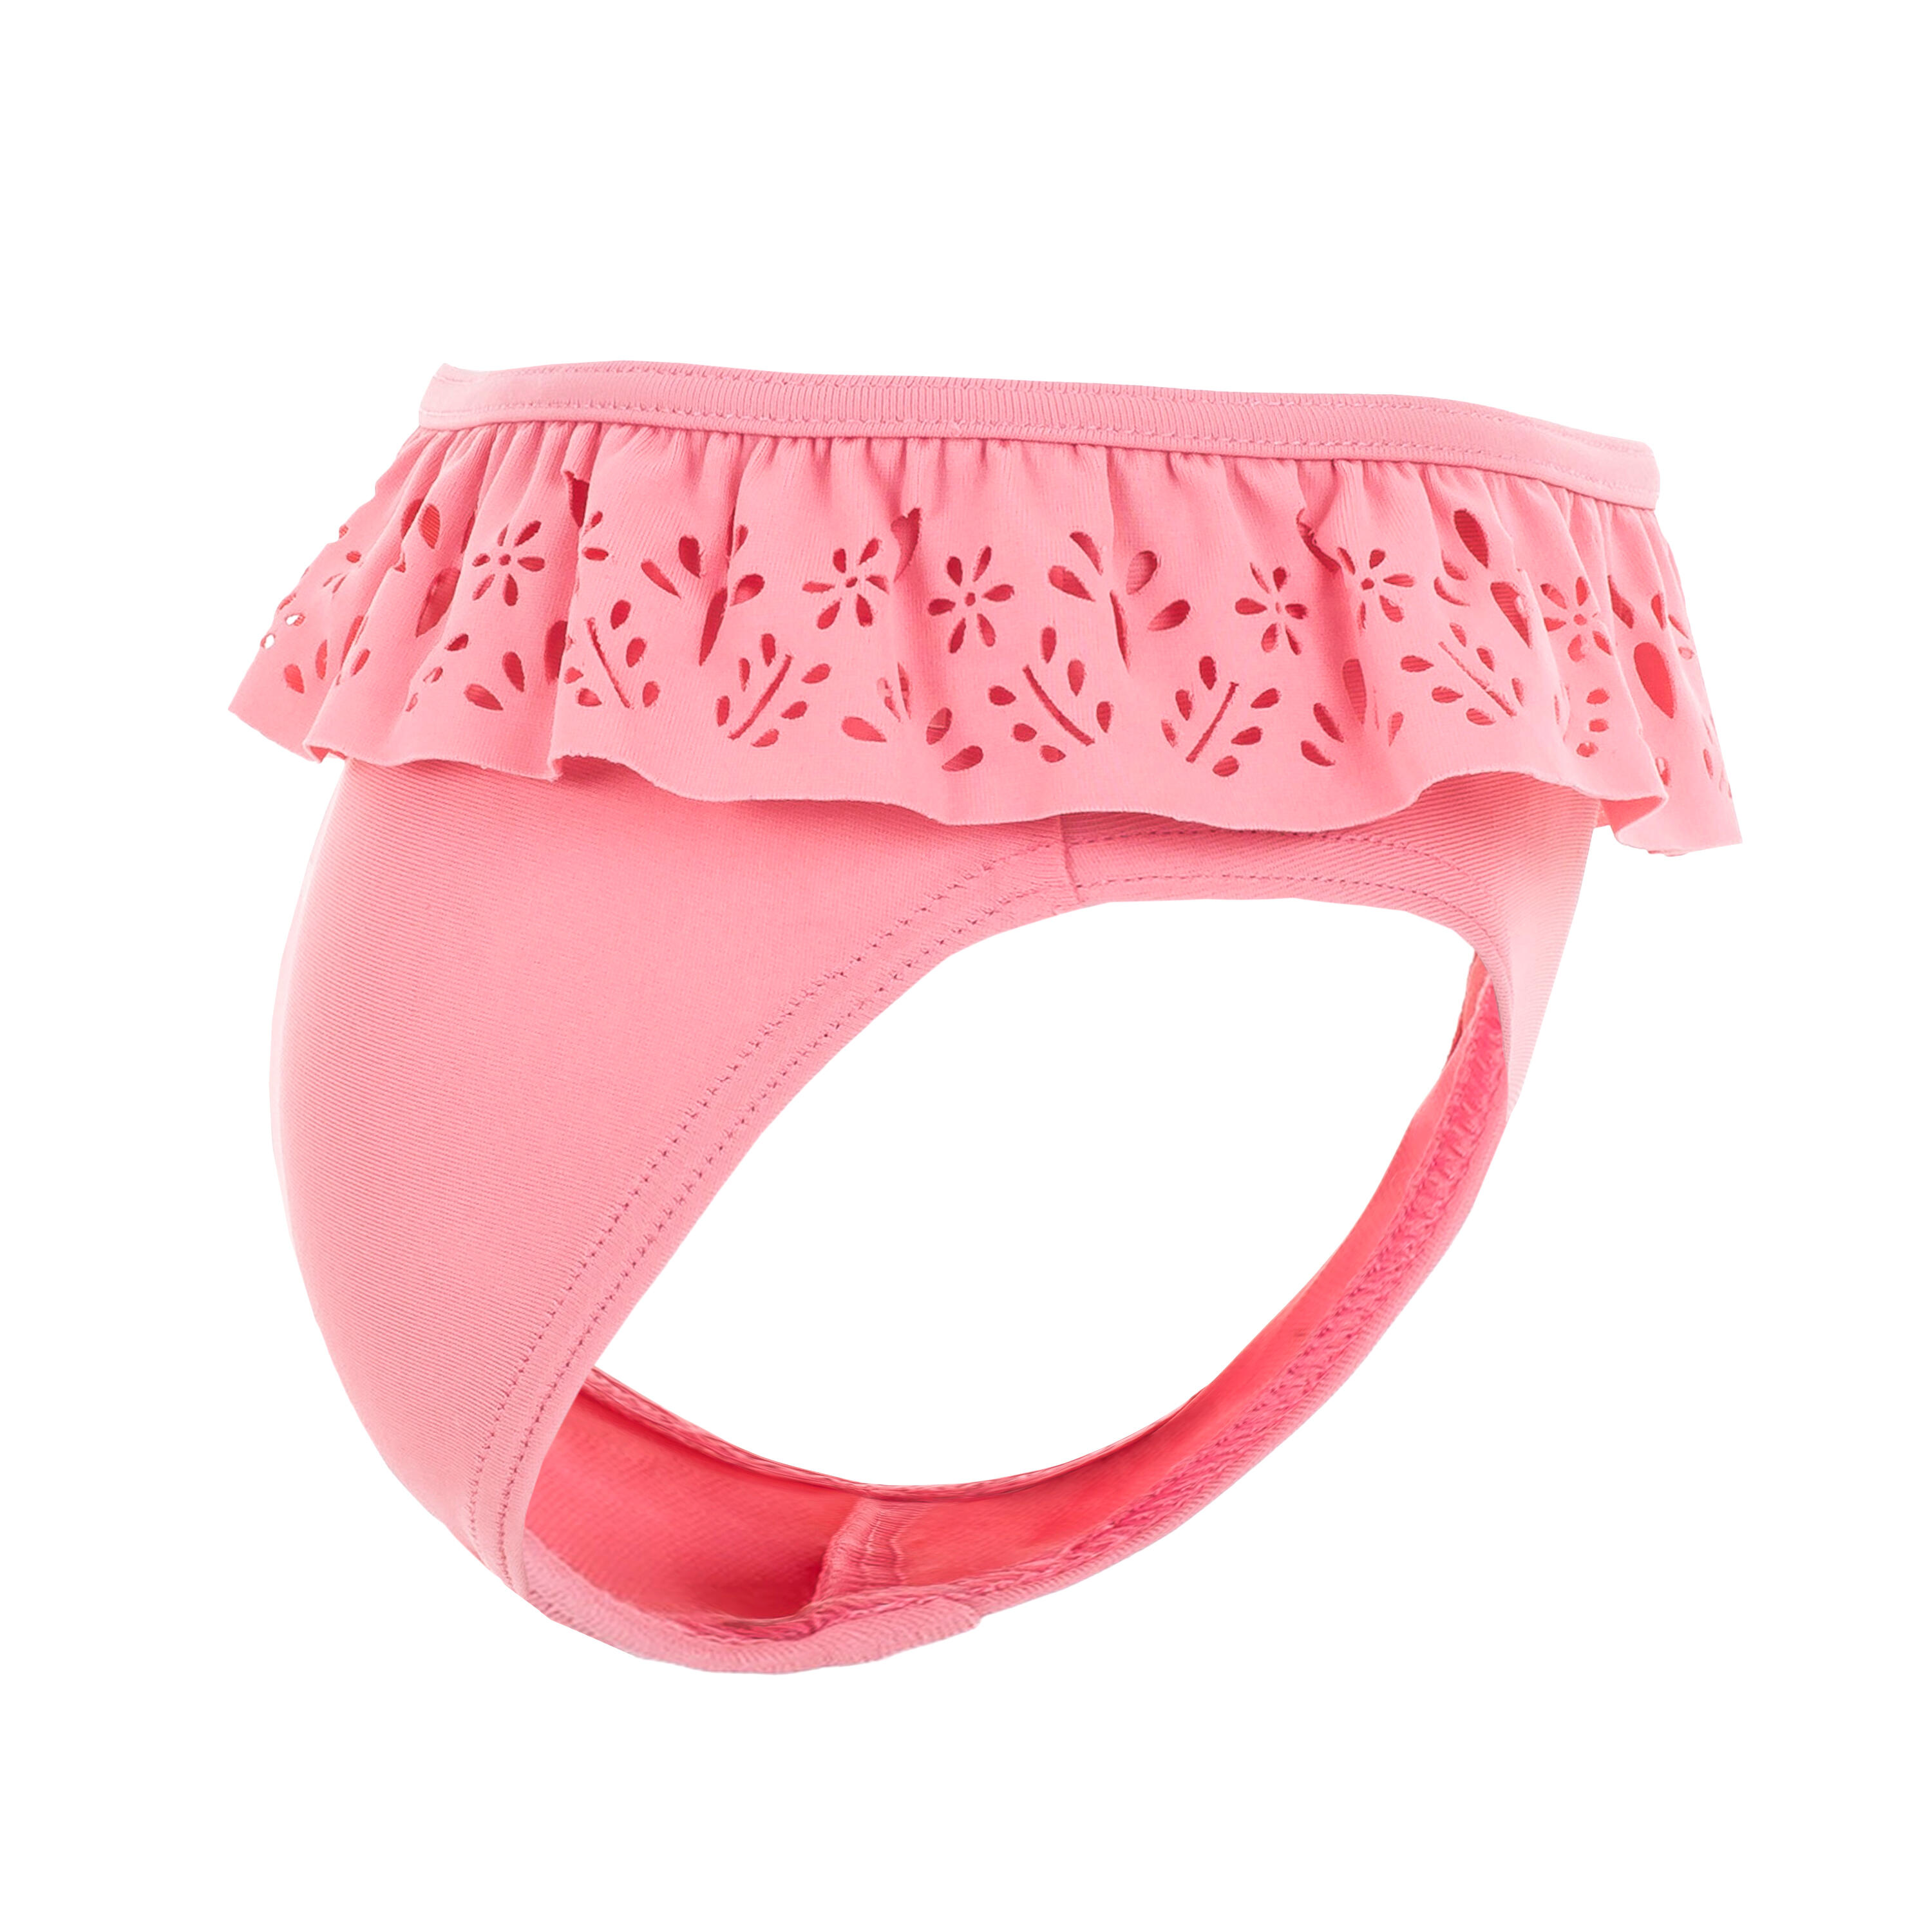 Baby Swimsuit Bottoms - Coral 4/4